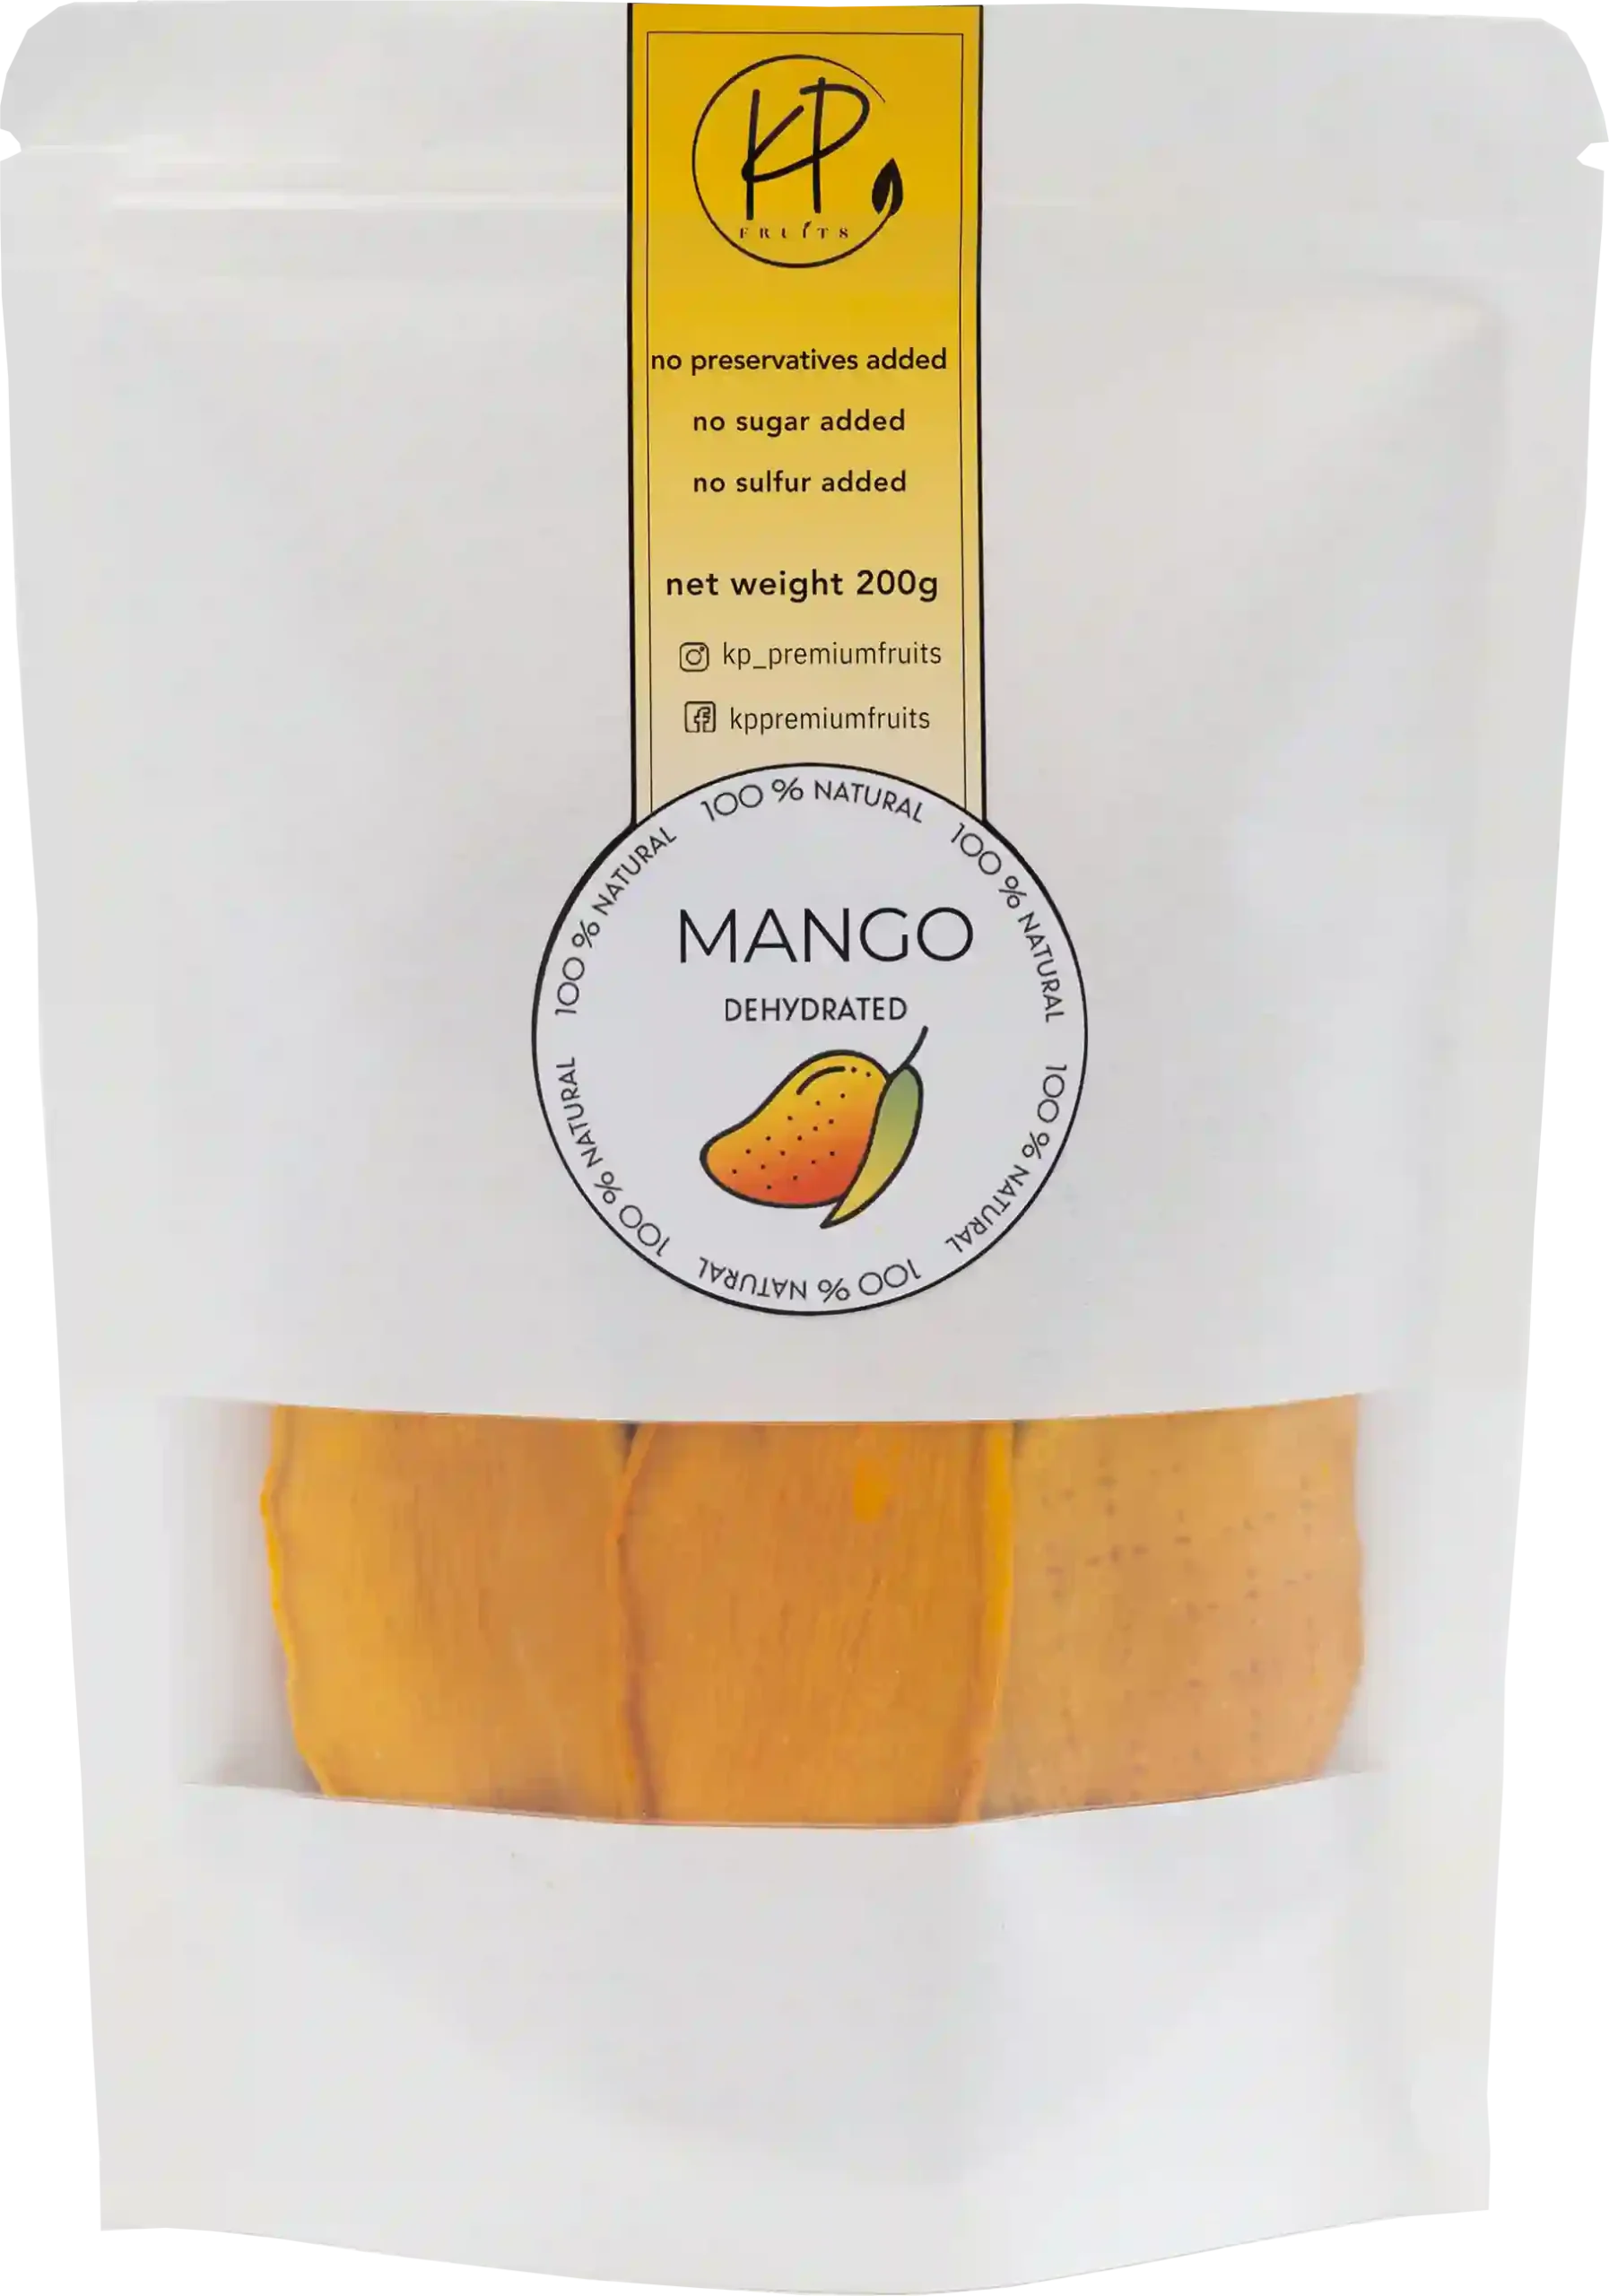 dried mango are a popular choice among mango enthusiasts, known for their exceptional flavor and quality.